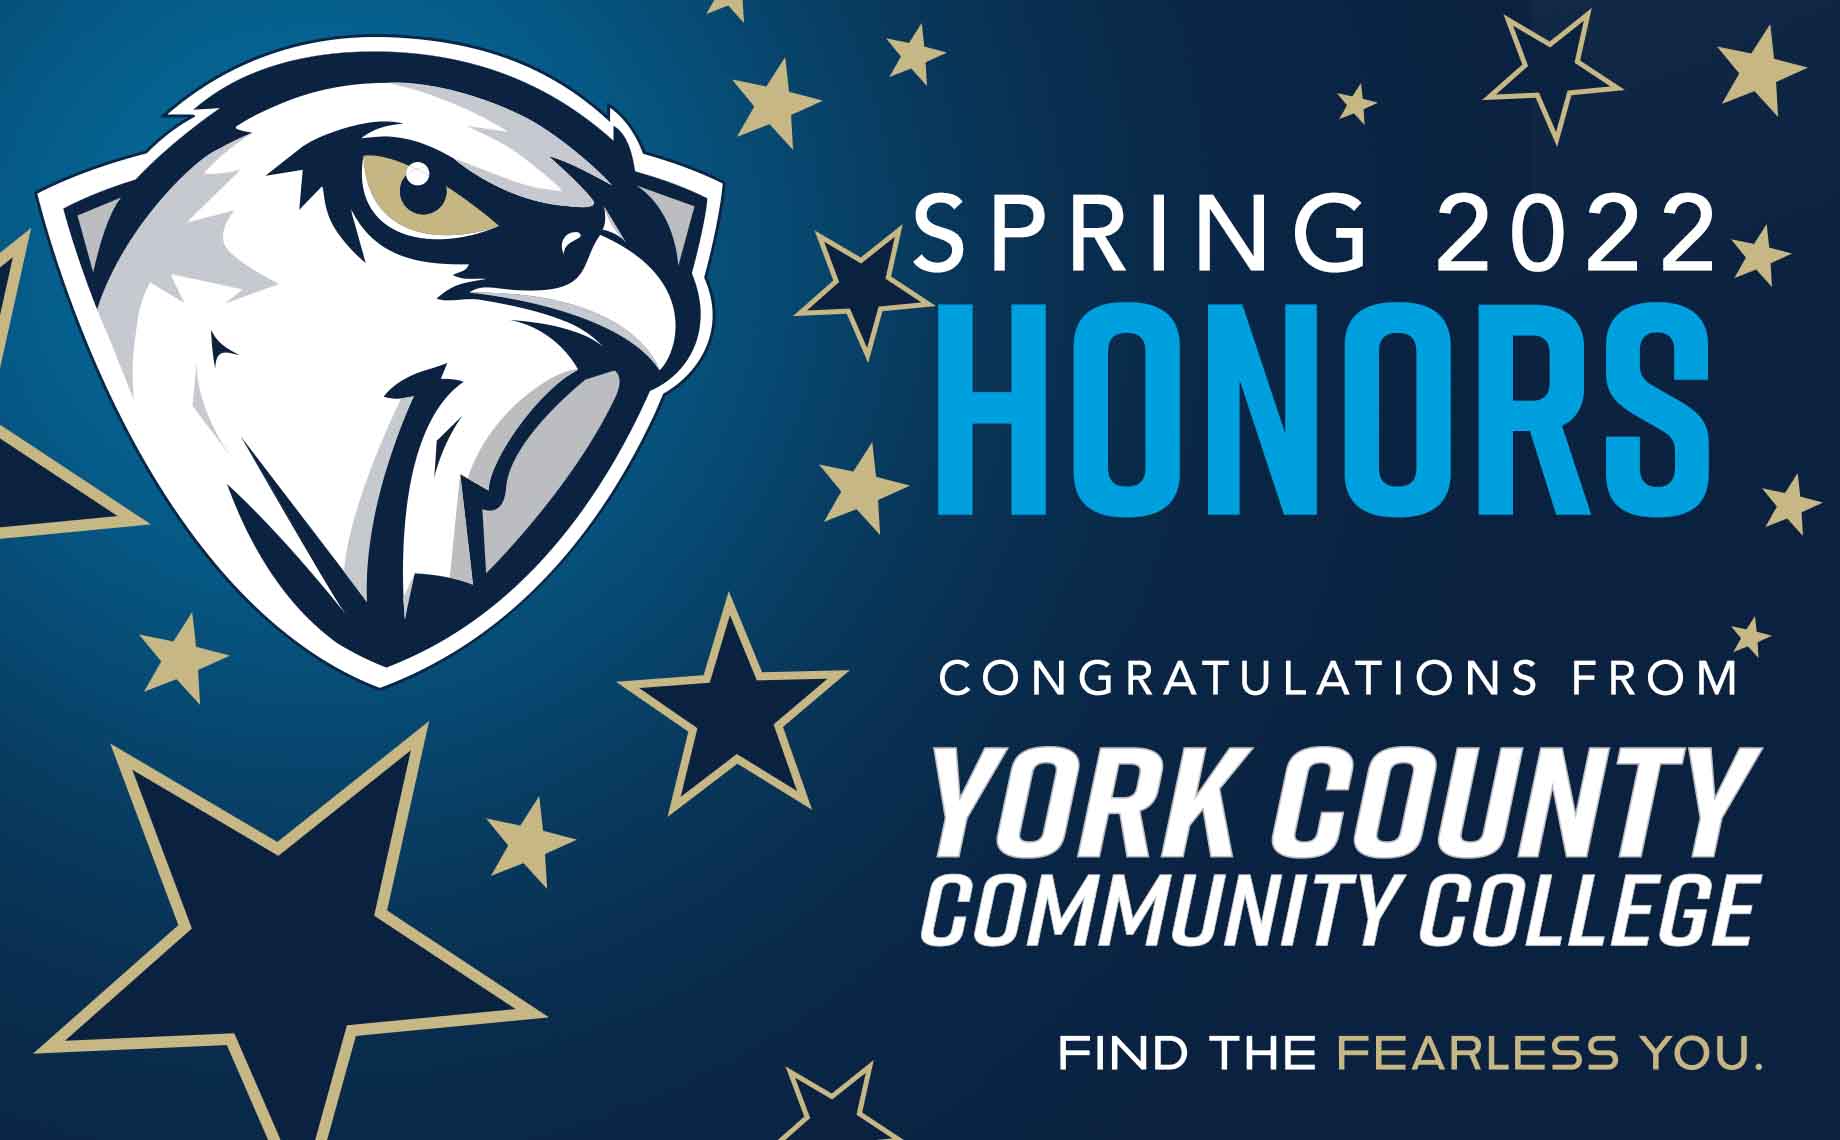 YCCC Announces SPRING 2022 Honors